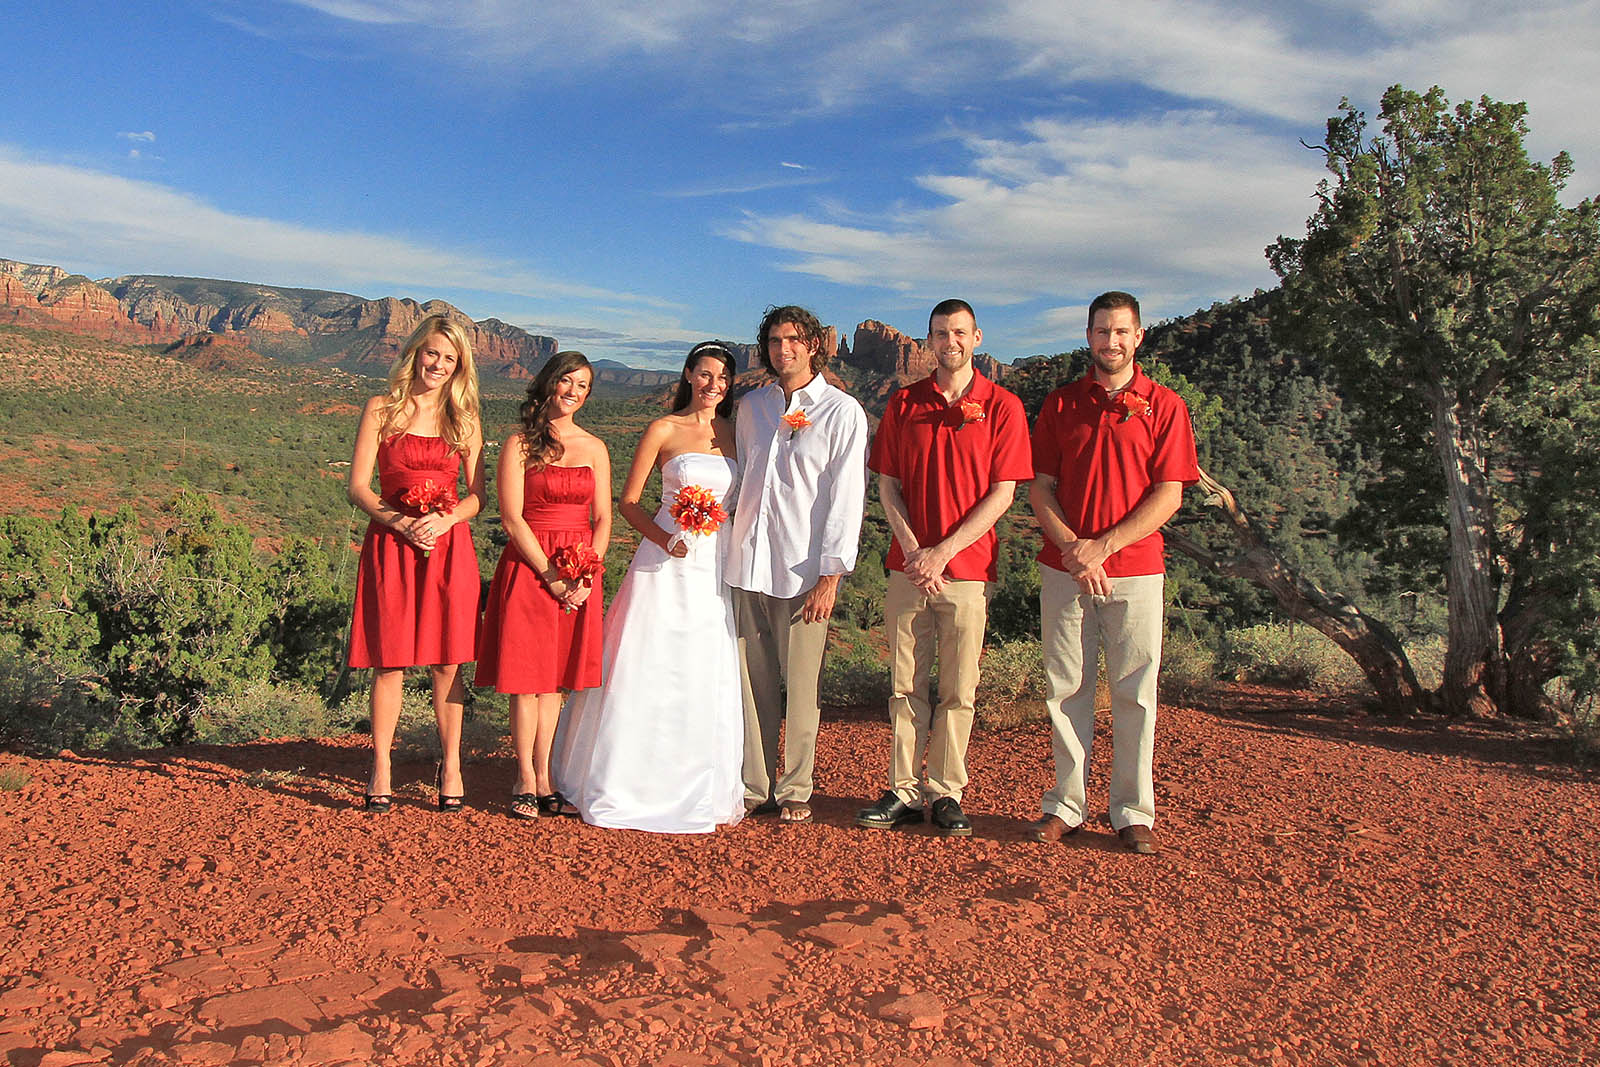 Wedding party posing for a picture outdoors in Sedona Arizona